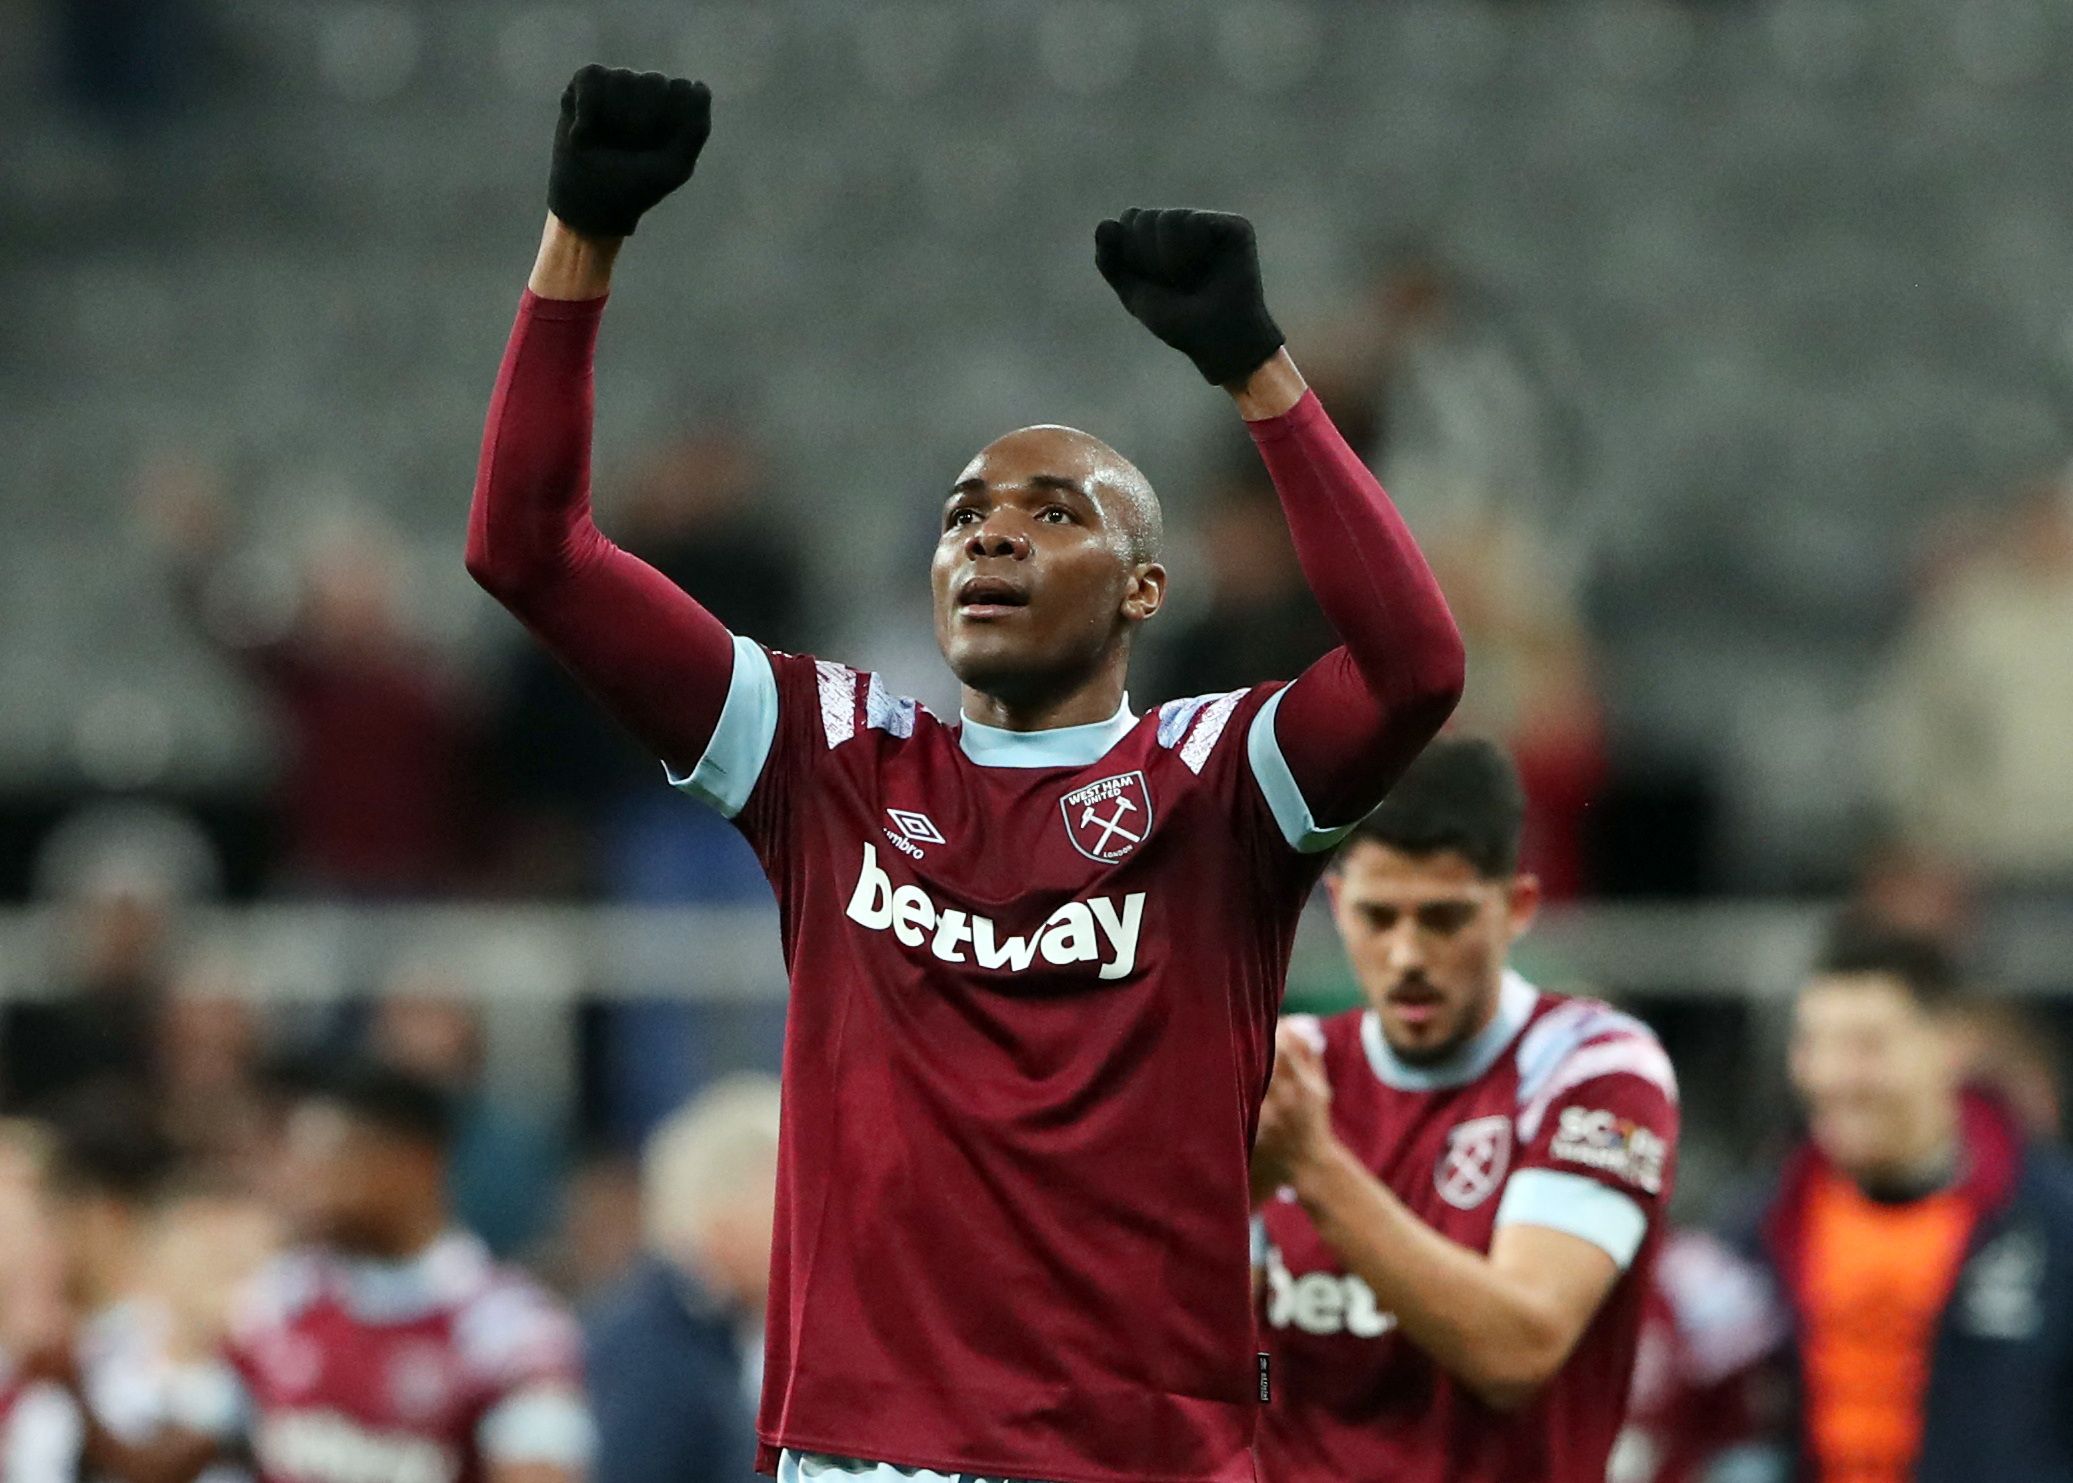 West Ham United's Angelo Ogbonna celebrates after the match